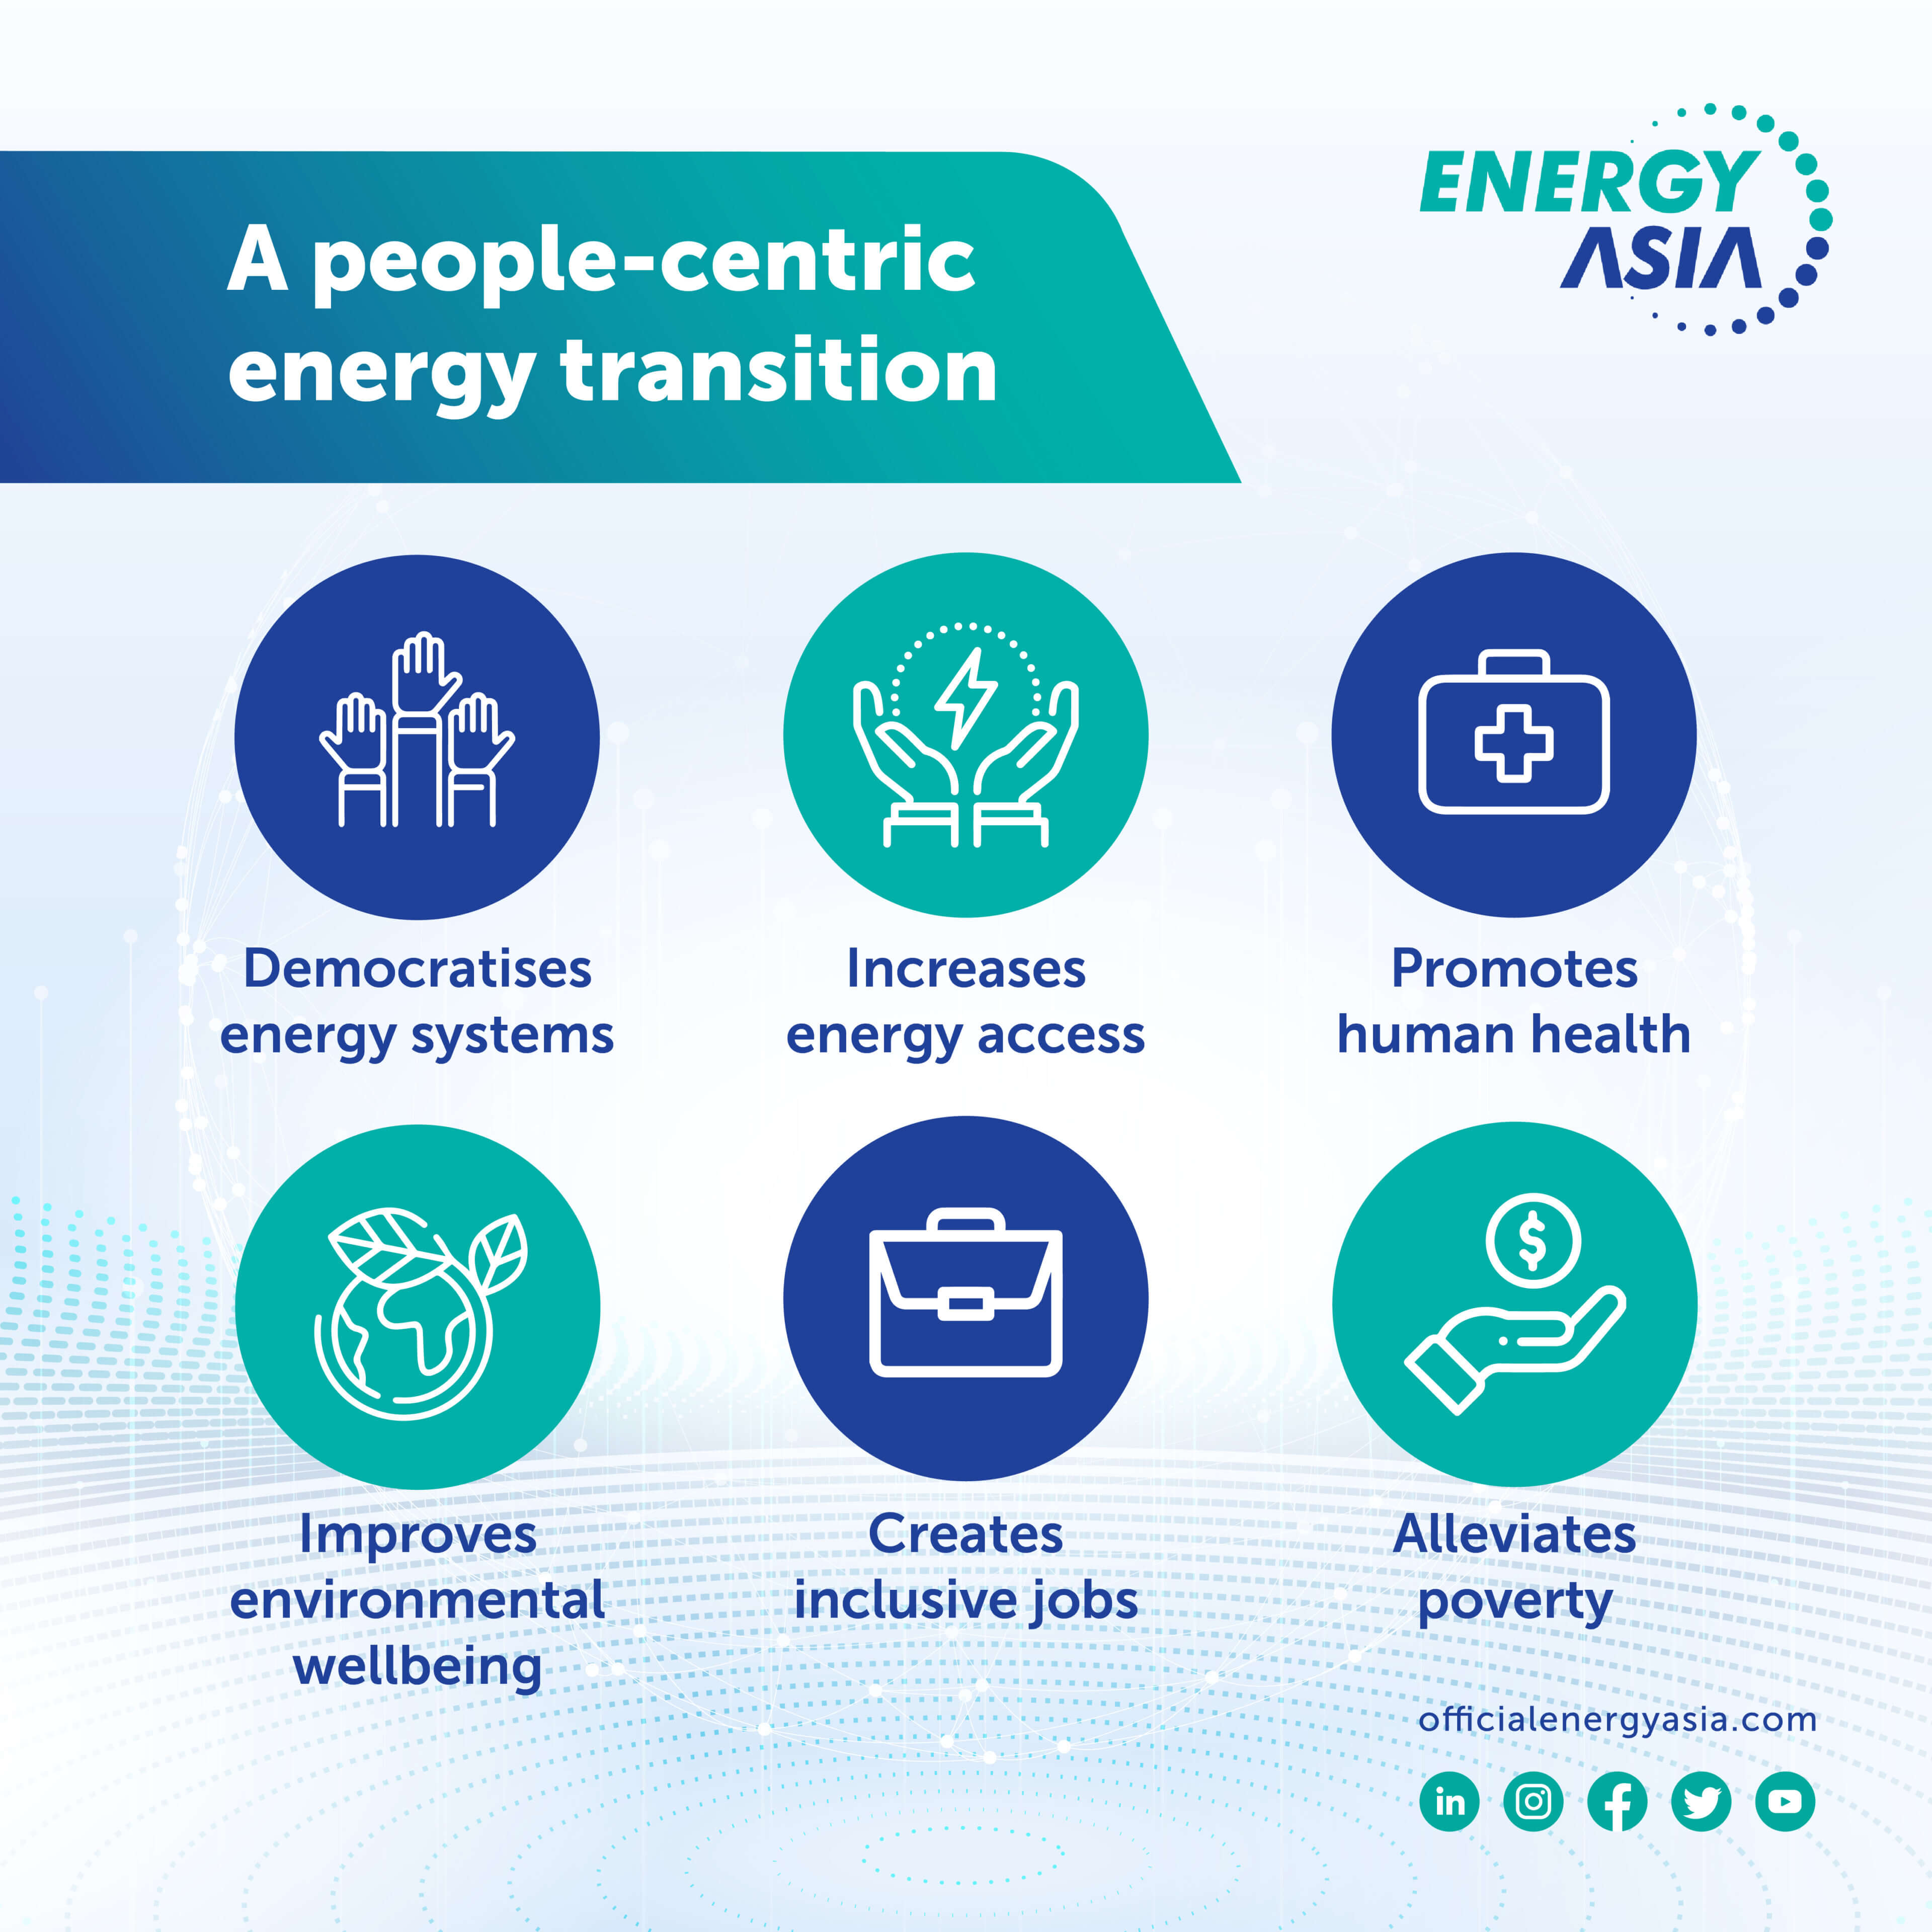 From Inclusion to Empowerment: The Social Impacts of a People-Centric Energy Transition 